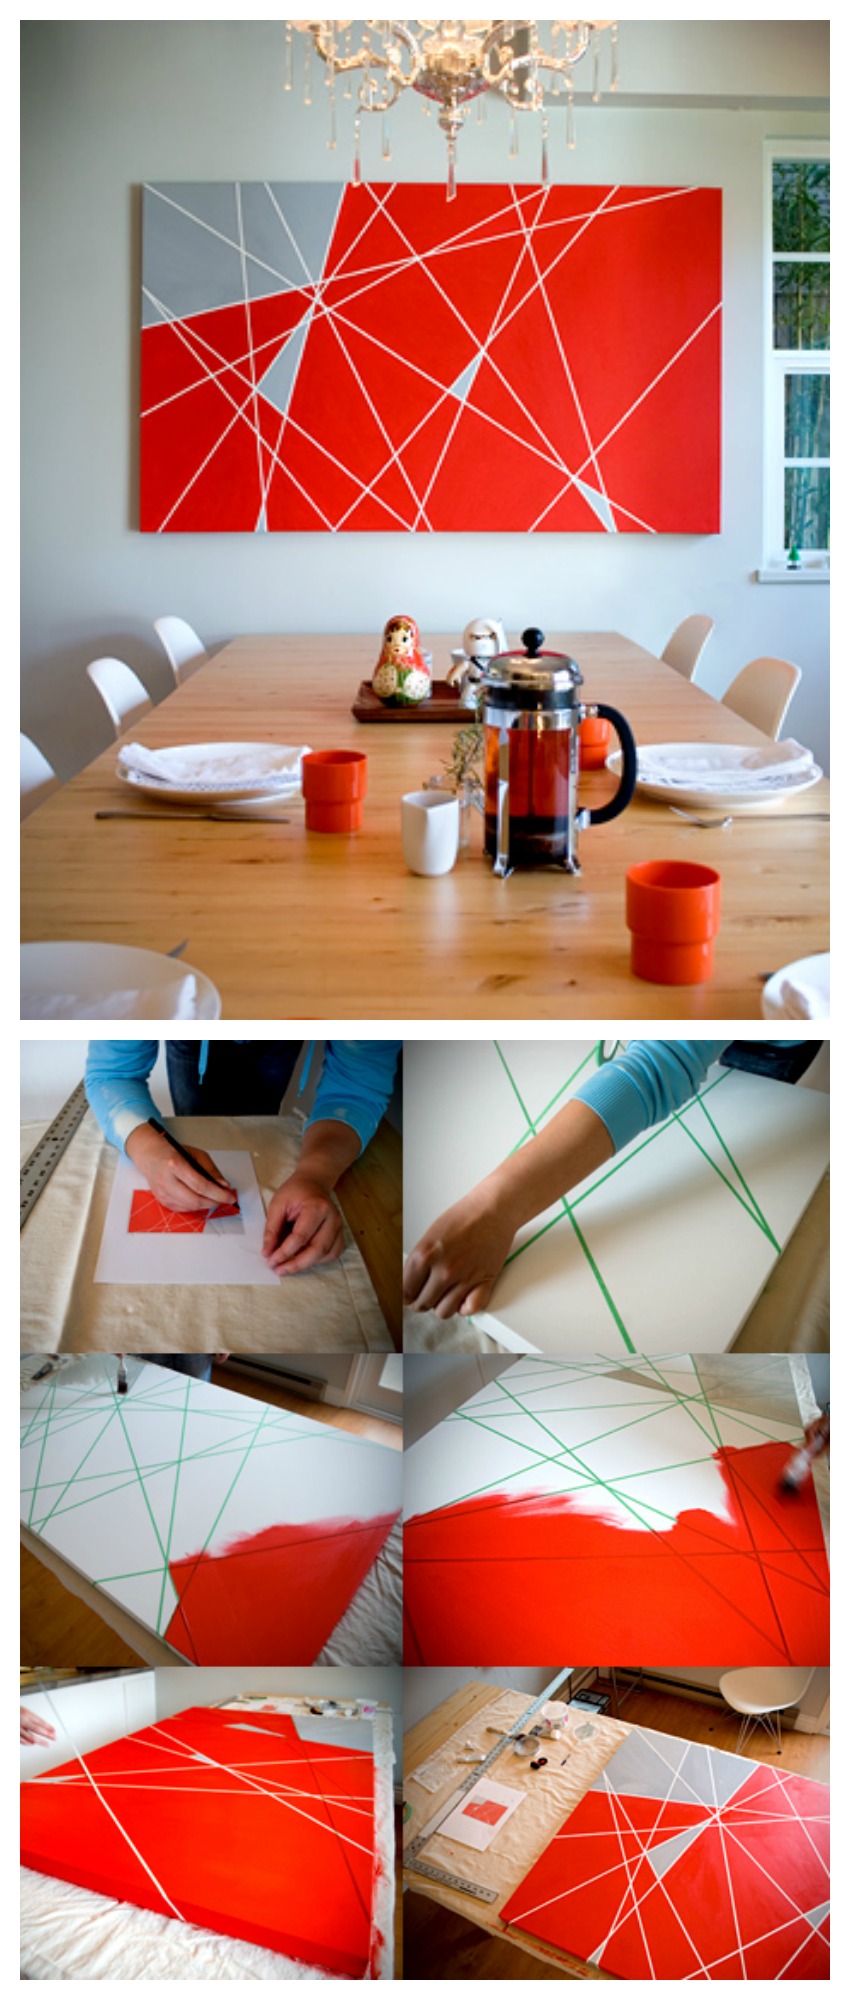 DIY wall art for the dining room